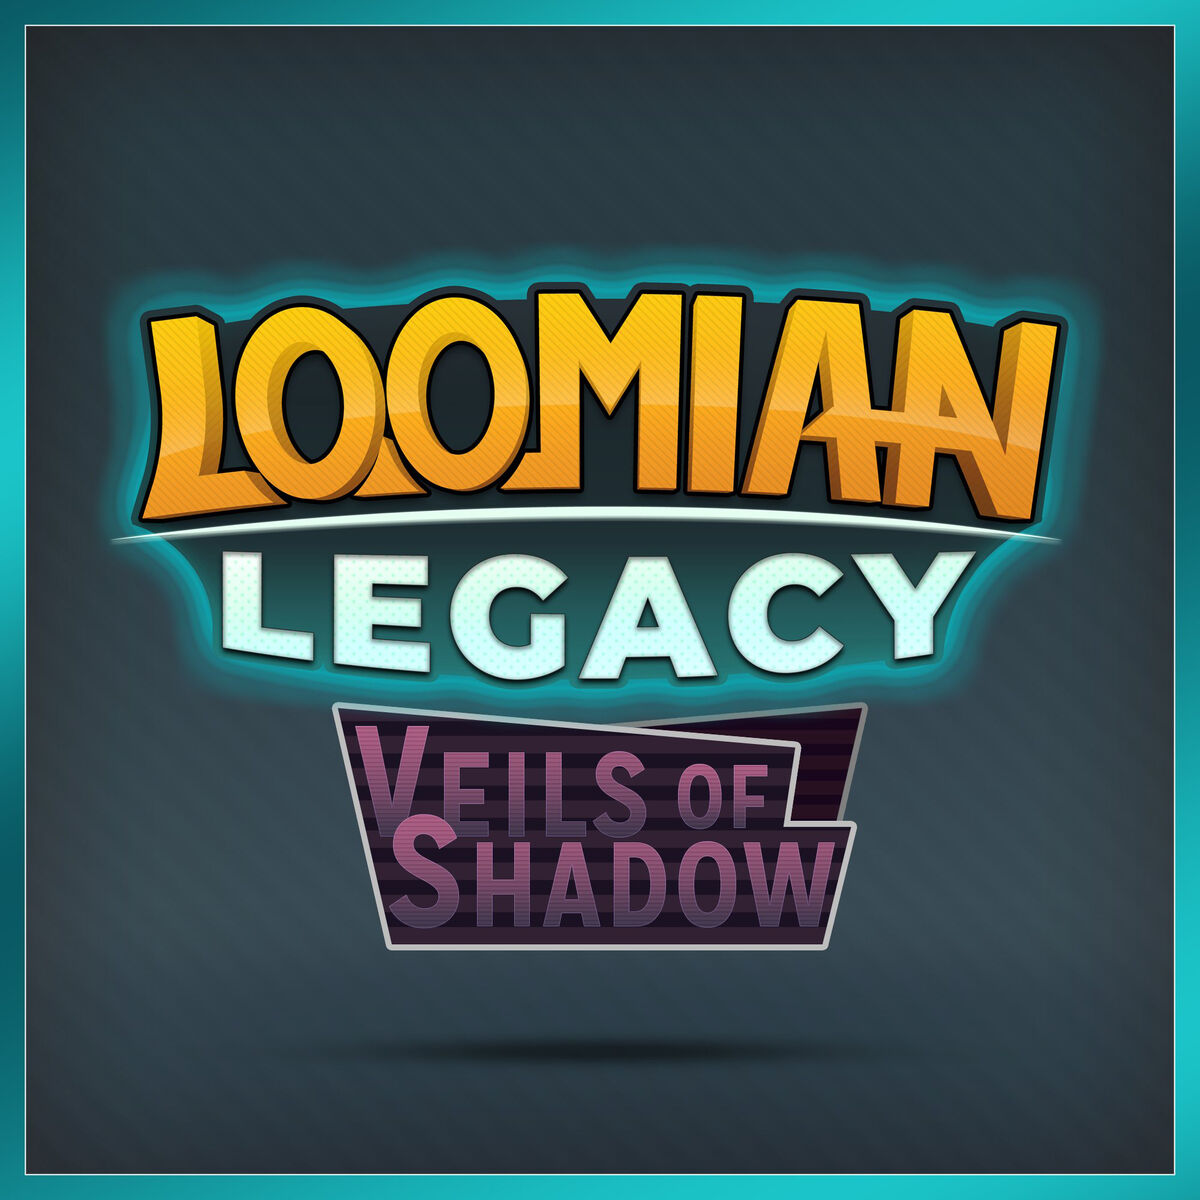 Release dates for loomian legacy